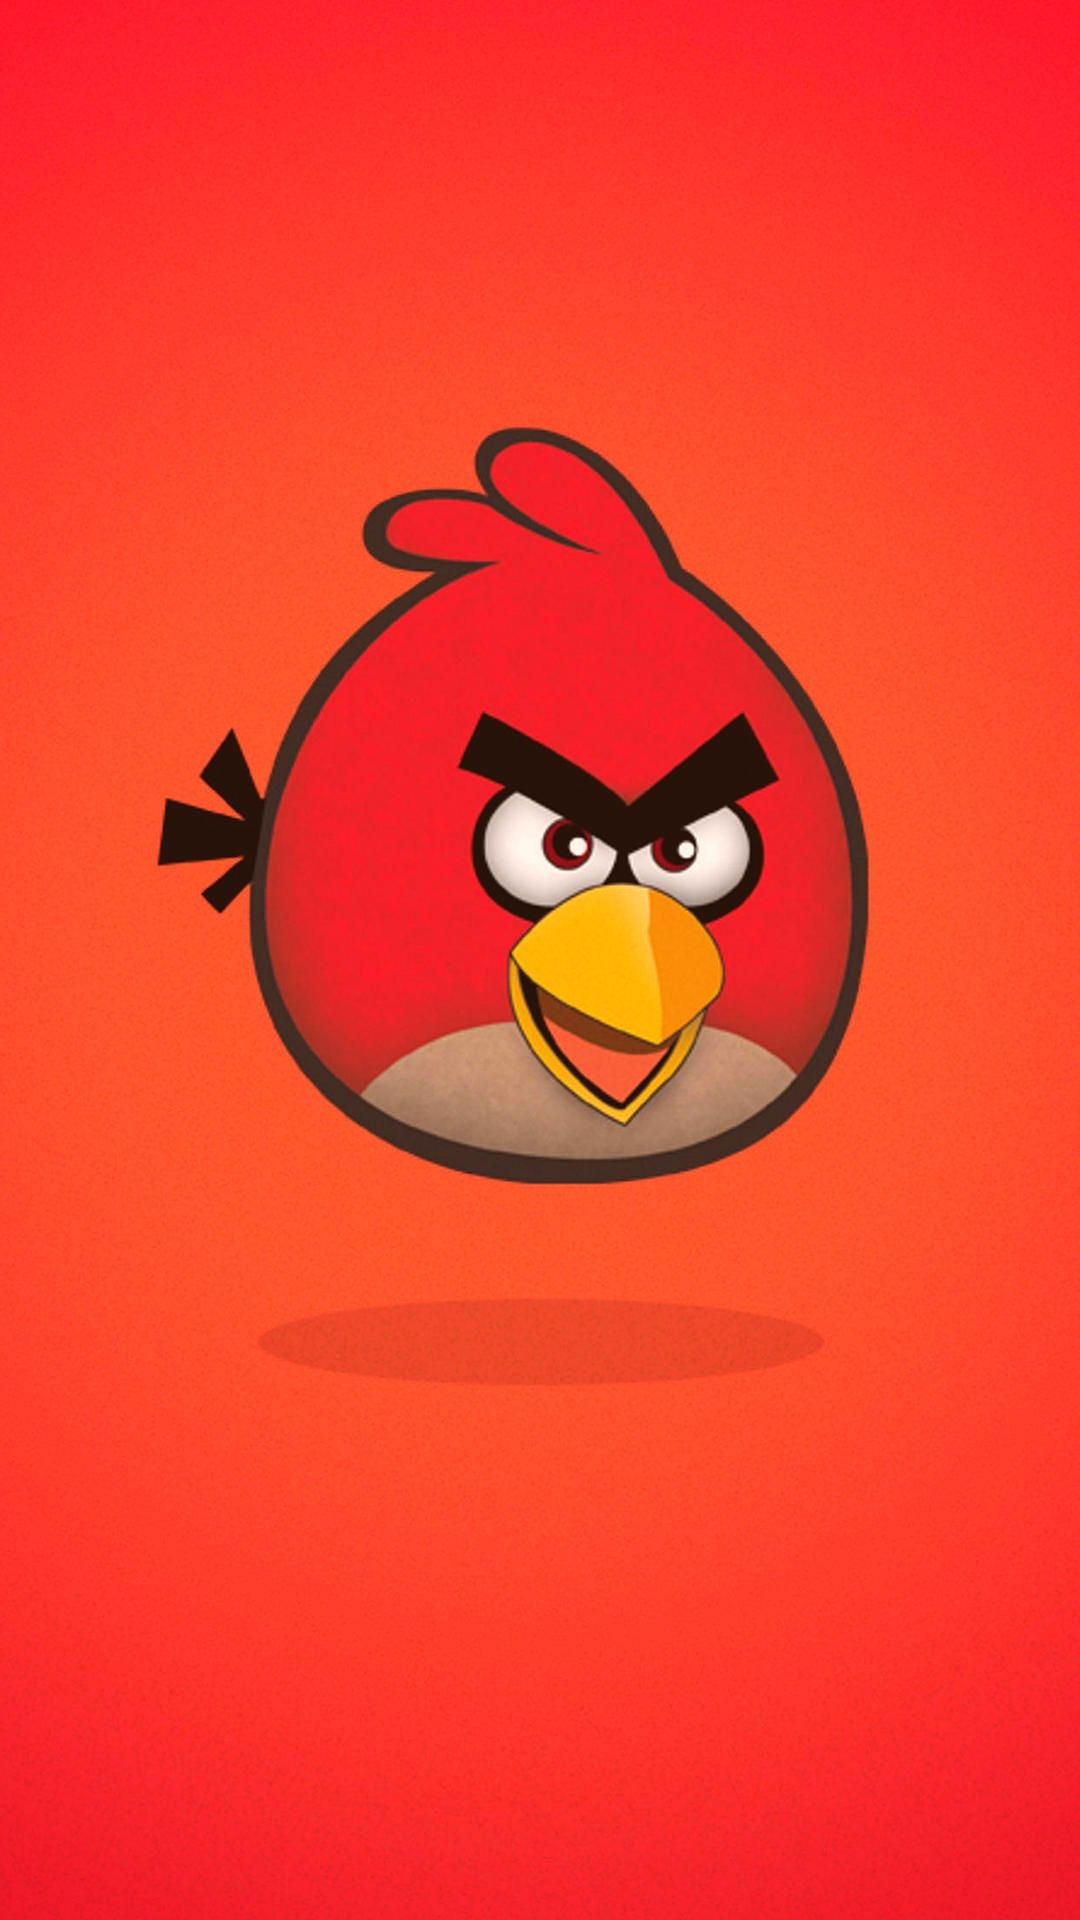 Minimalist Angry Birds wallpaper, High definition, Crazy design, Character showcase, 1080x1920 Full HD Phone